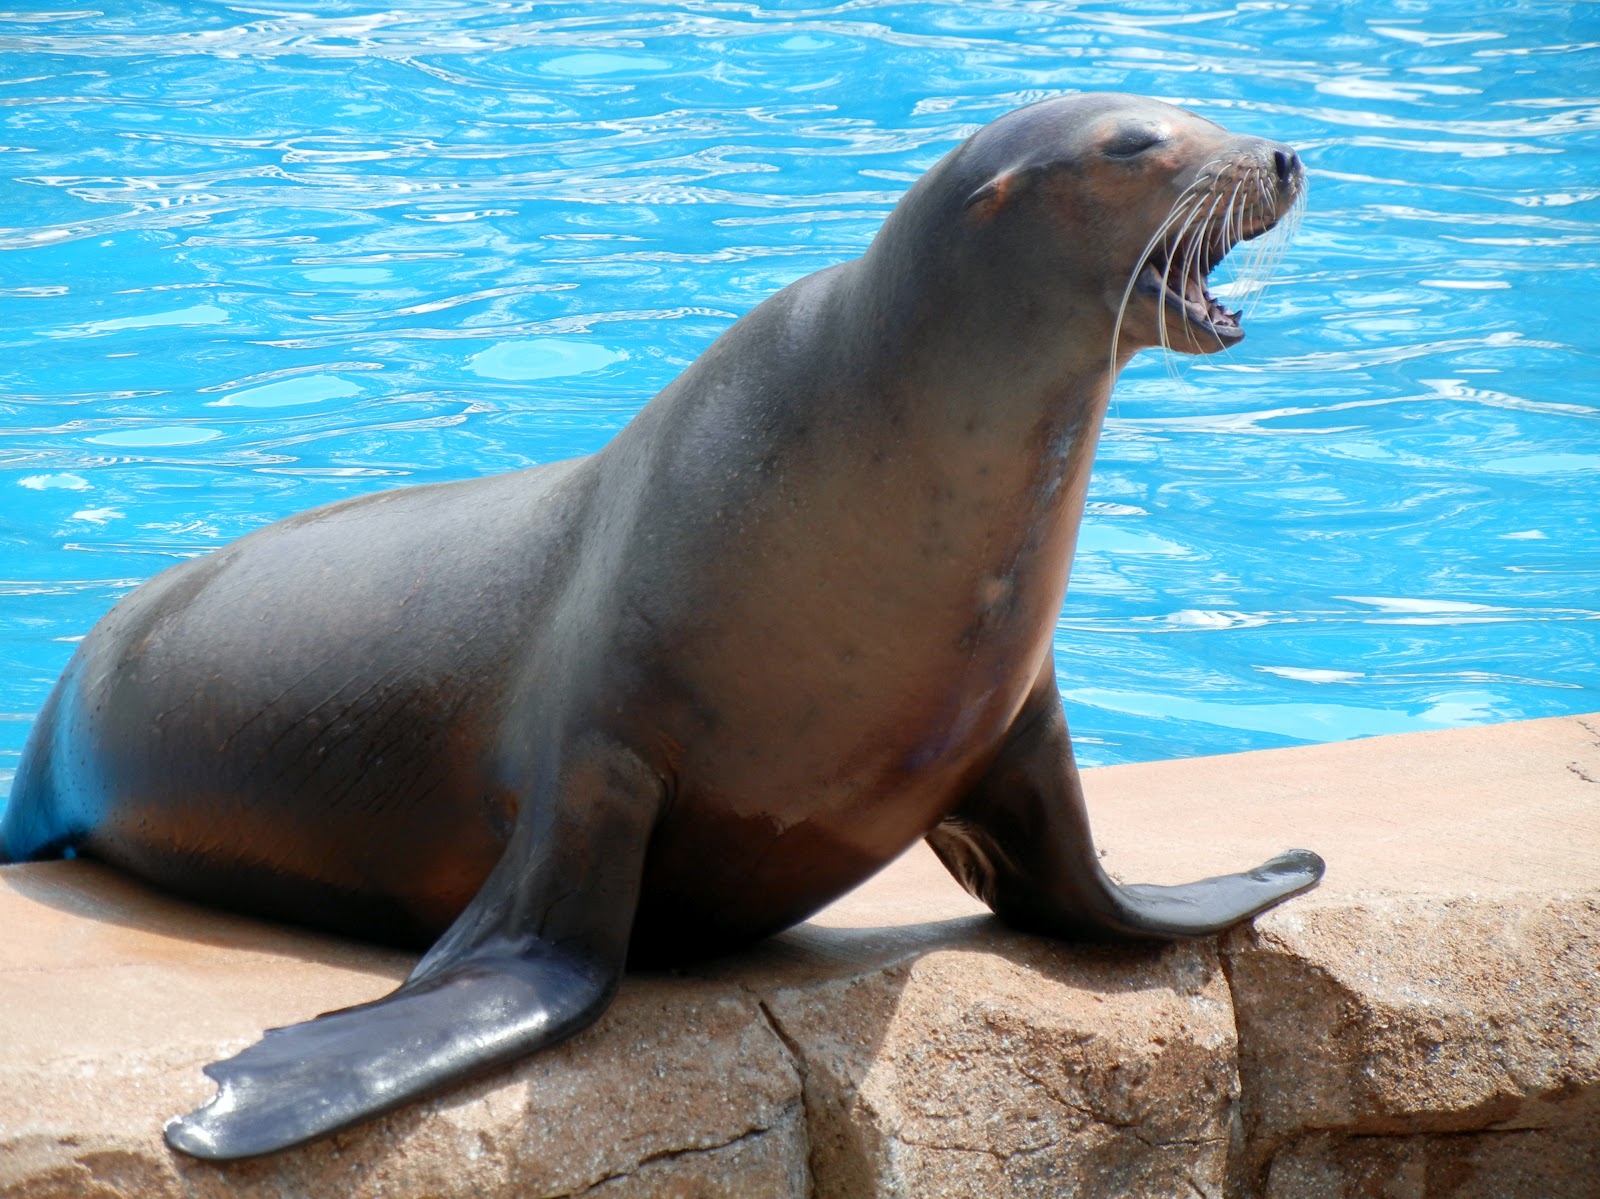 Sea lion at the zoo